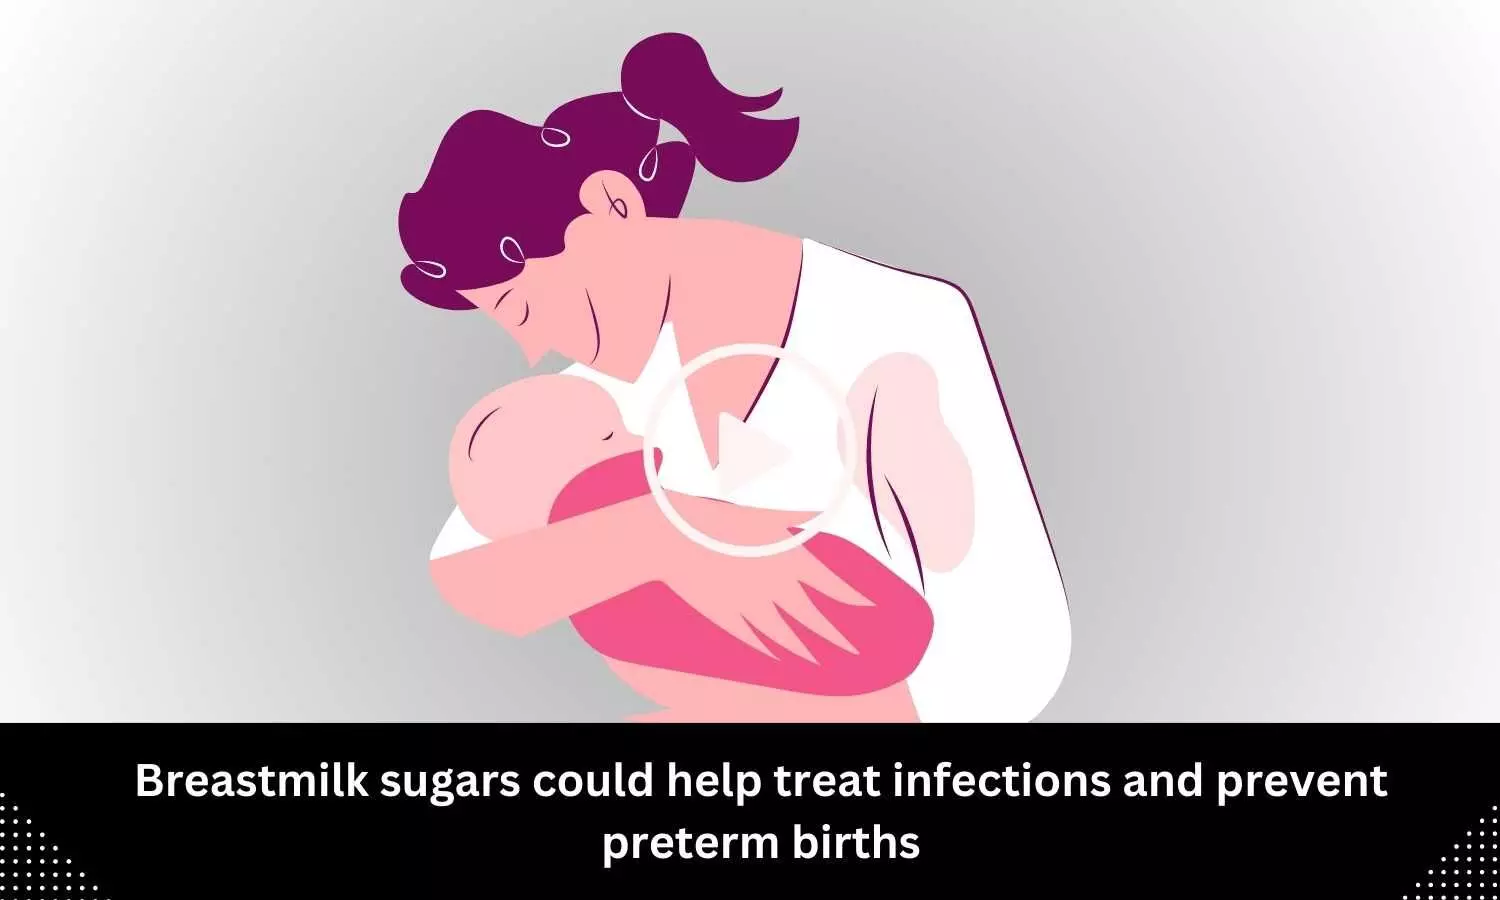 Breastmilk sugars could help treat infections and prevent preterm births